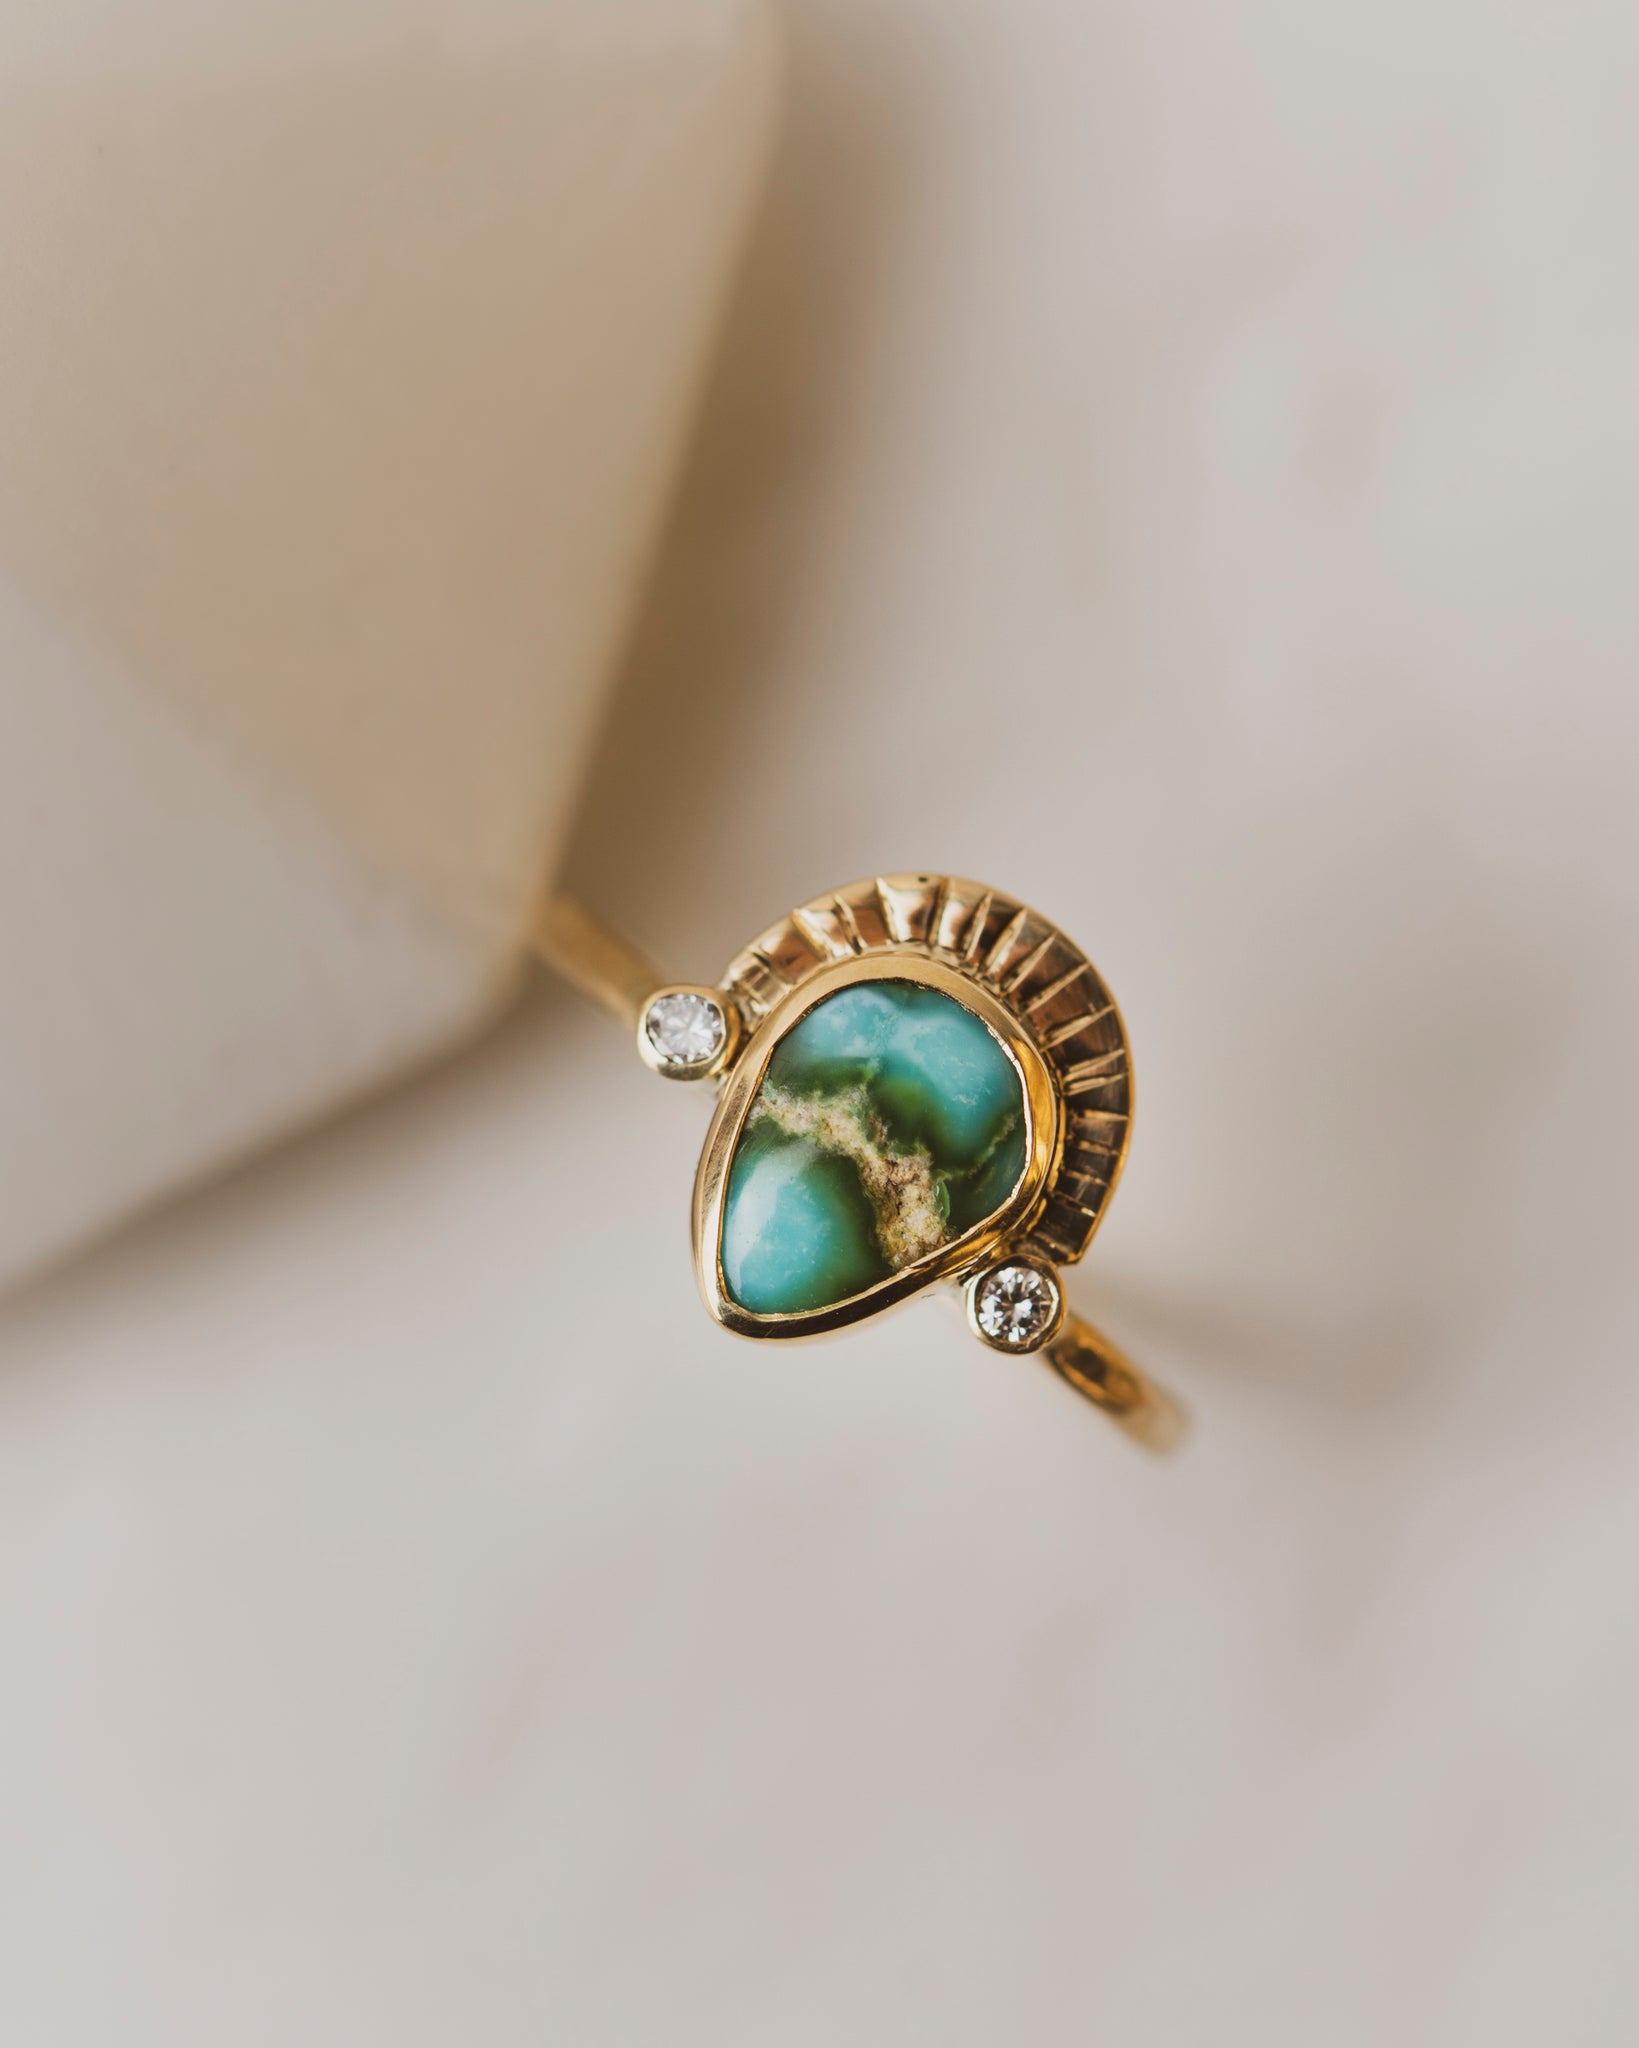 Sonoran Gold Turquoise is bezel set between two 2mm white diamonds on a shield of 18K yellow gold